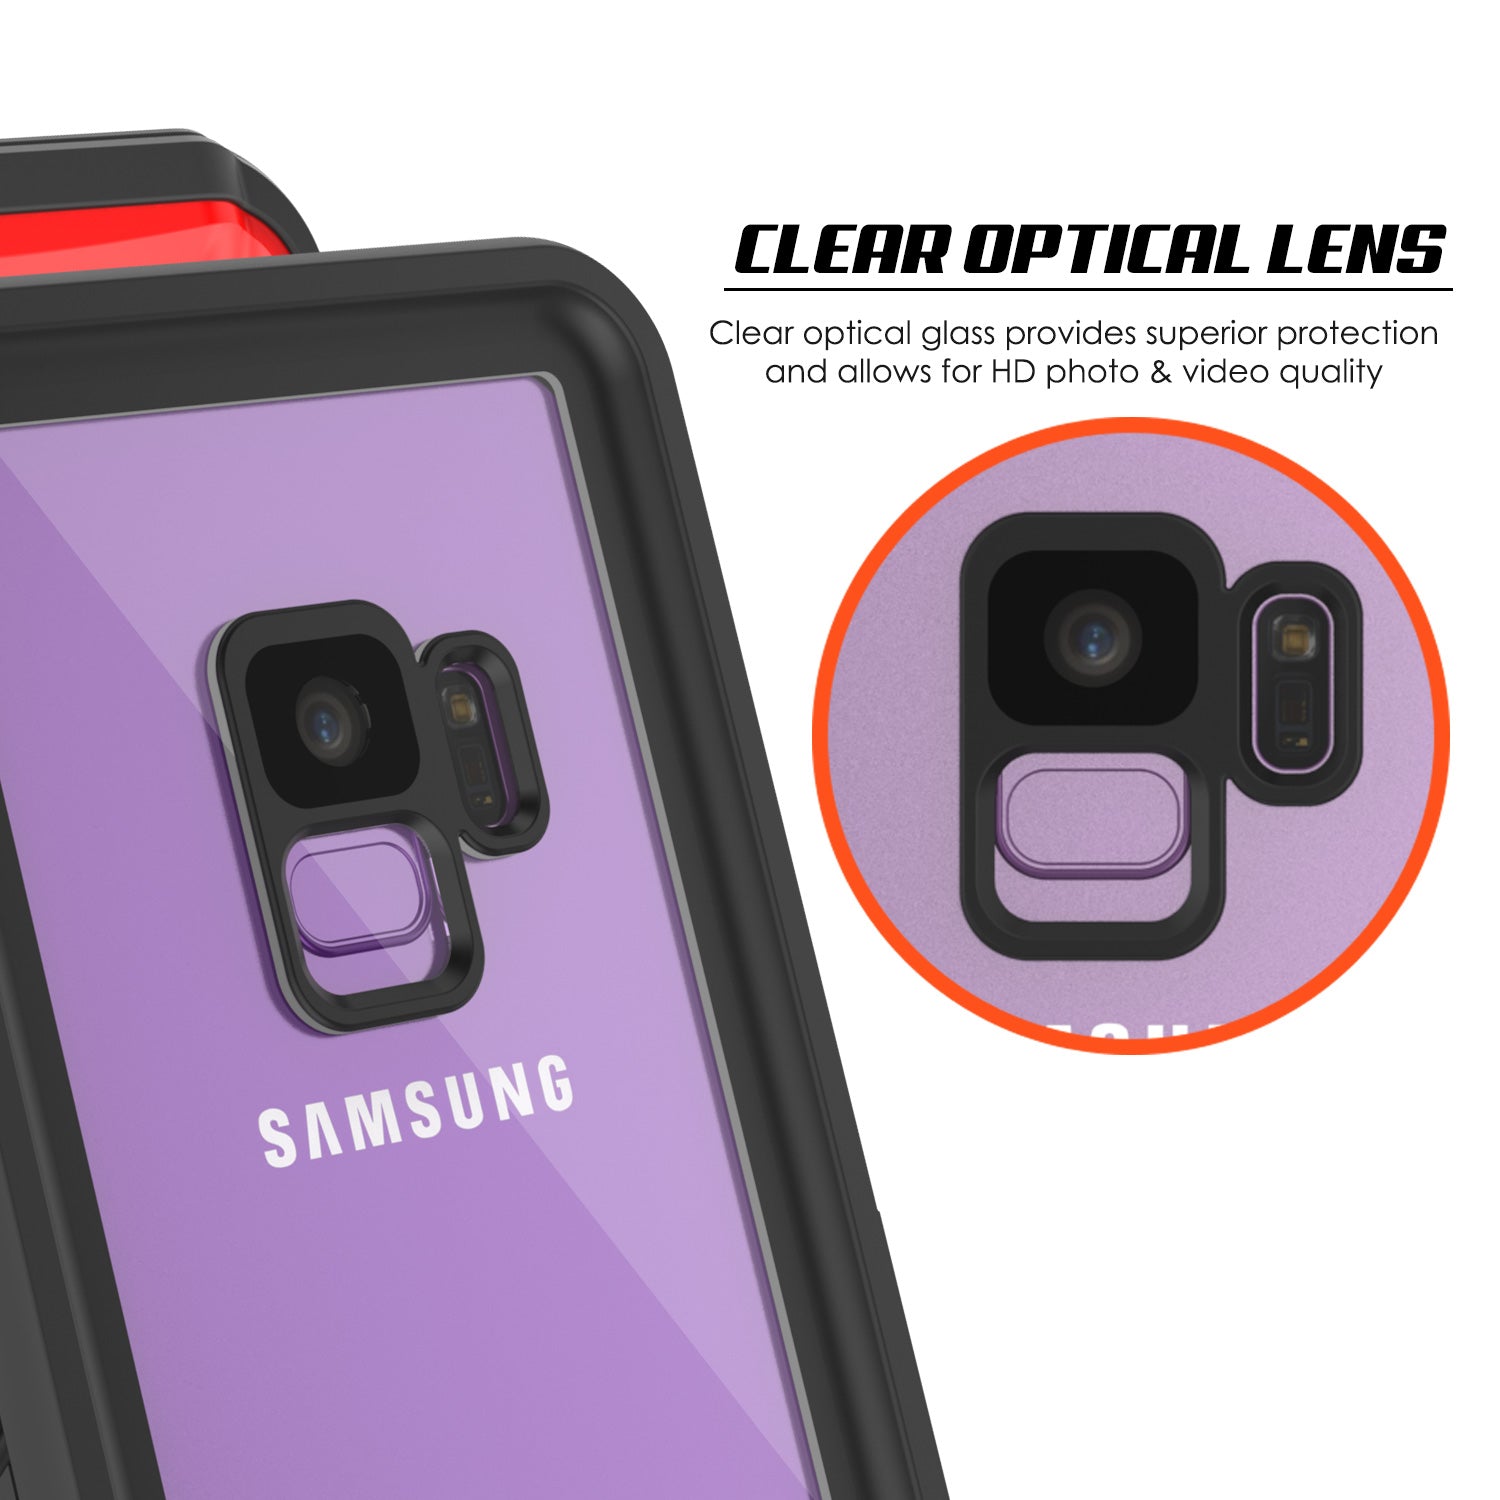 Galaxy S9 Plus, Punkcase Extreme W/ Built Screen Protector [red]